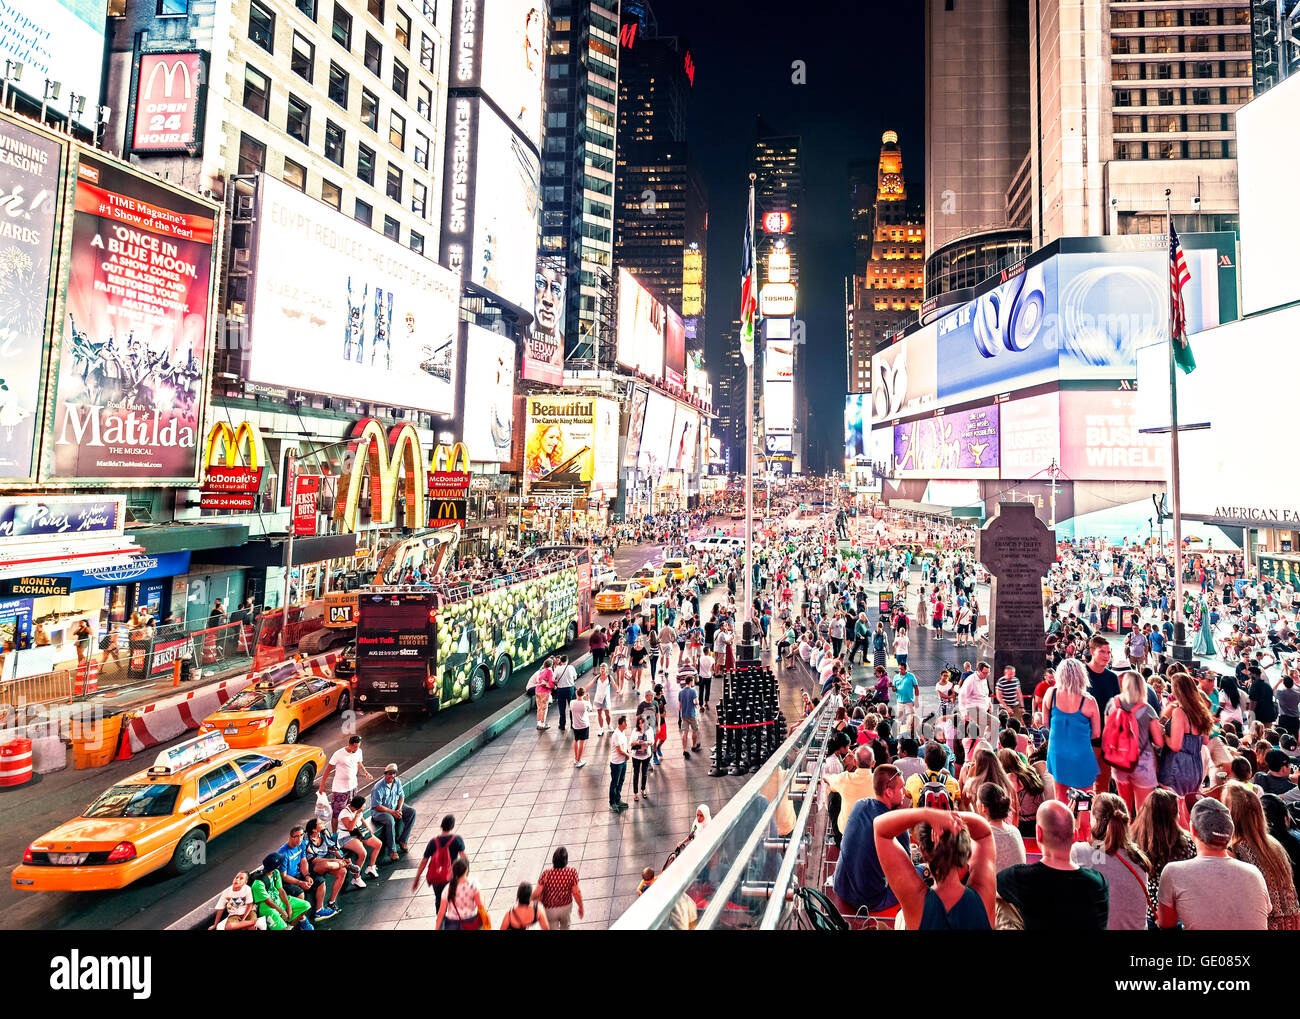 Times Square at night crowded with tourists, Broadway Theaters, shops and LED signs. Stock Photo